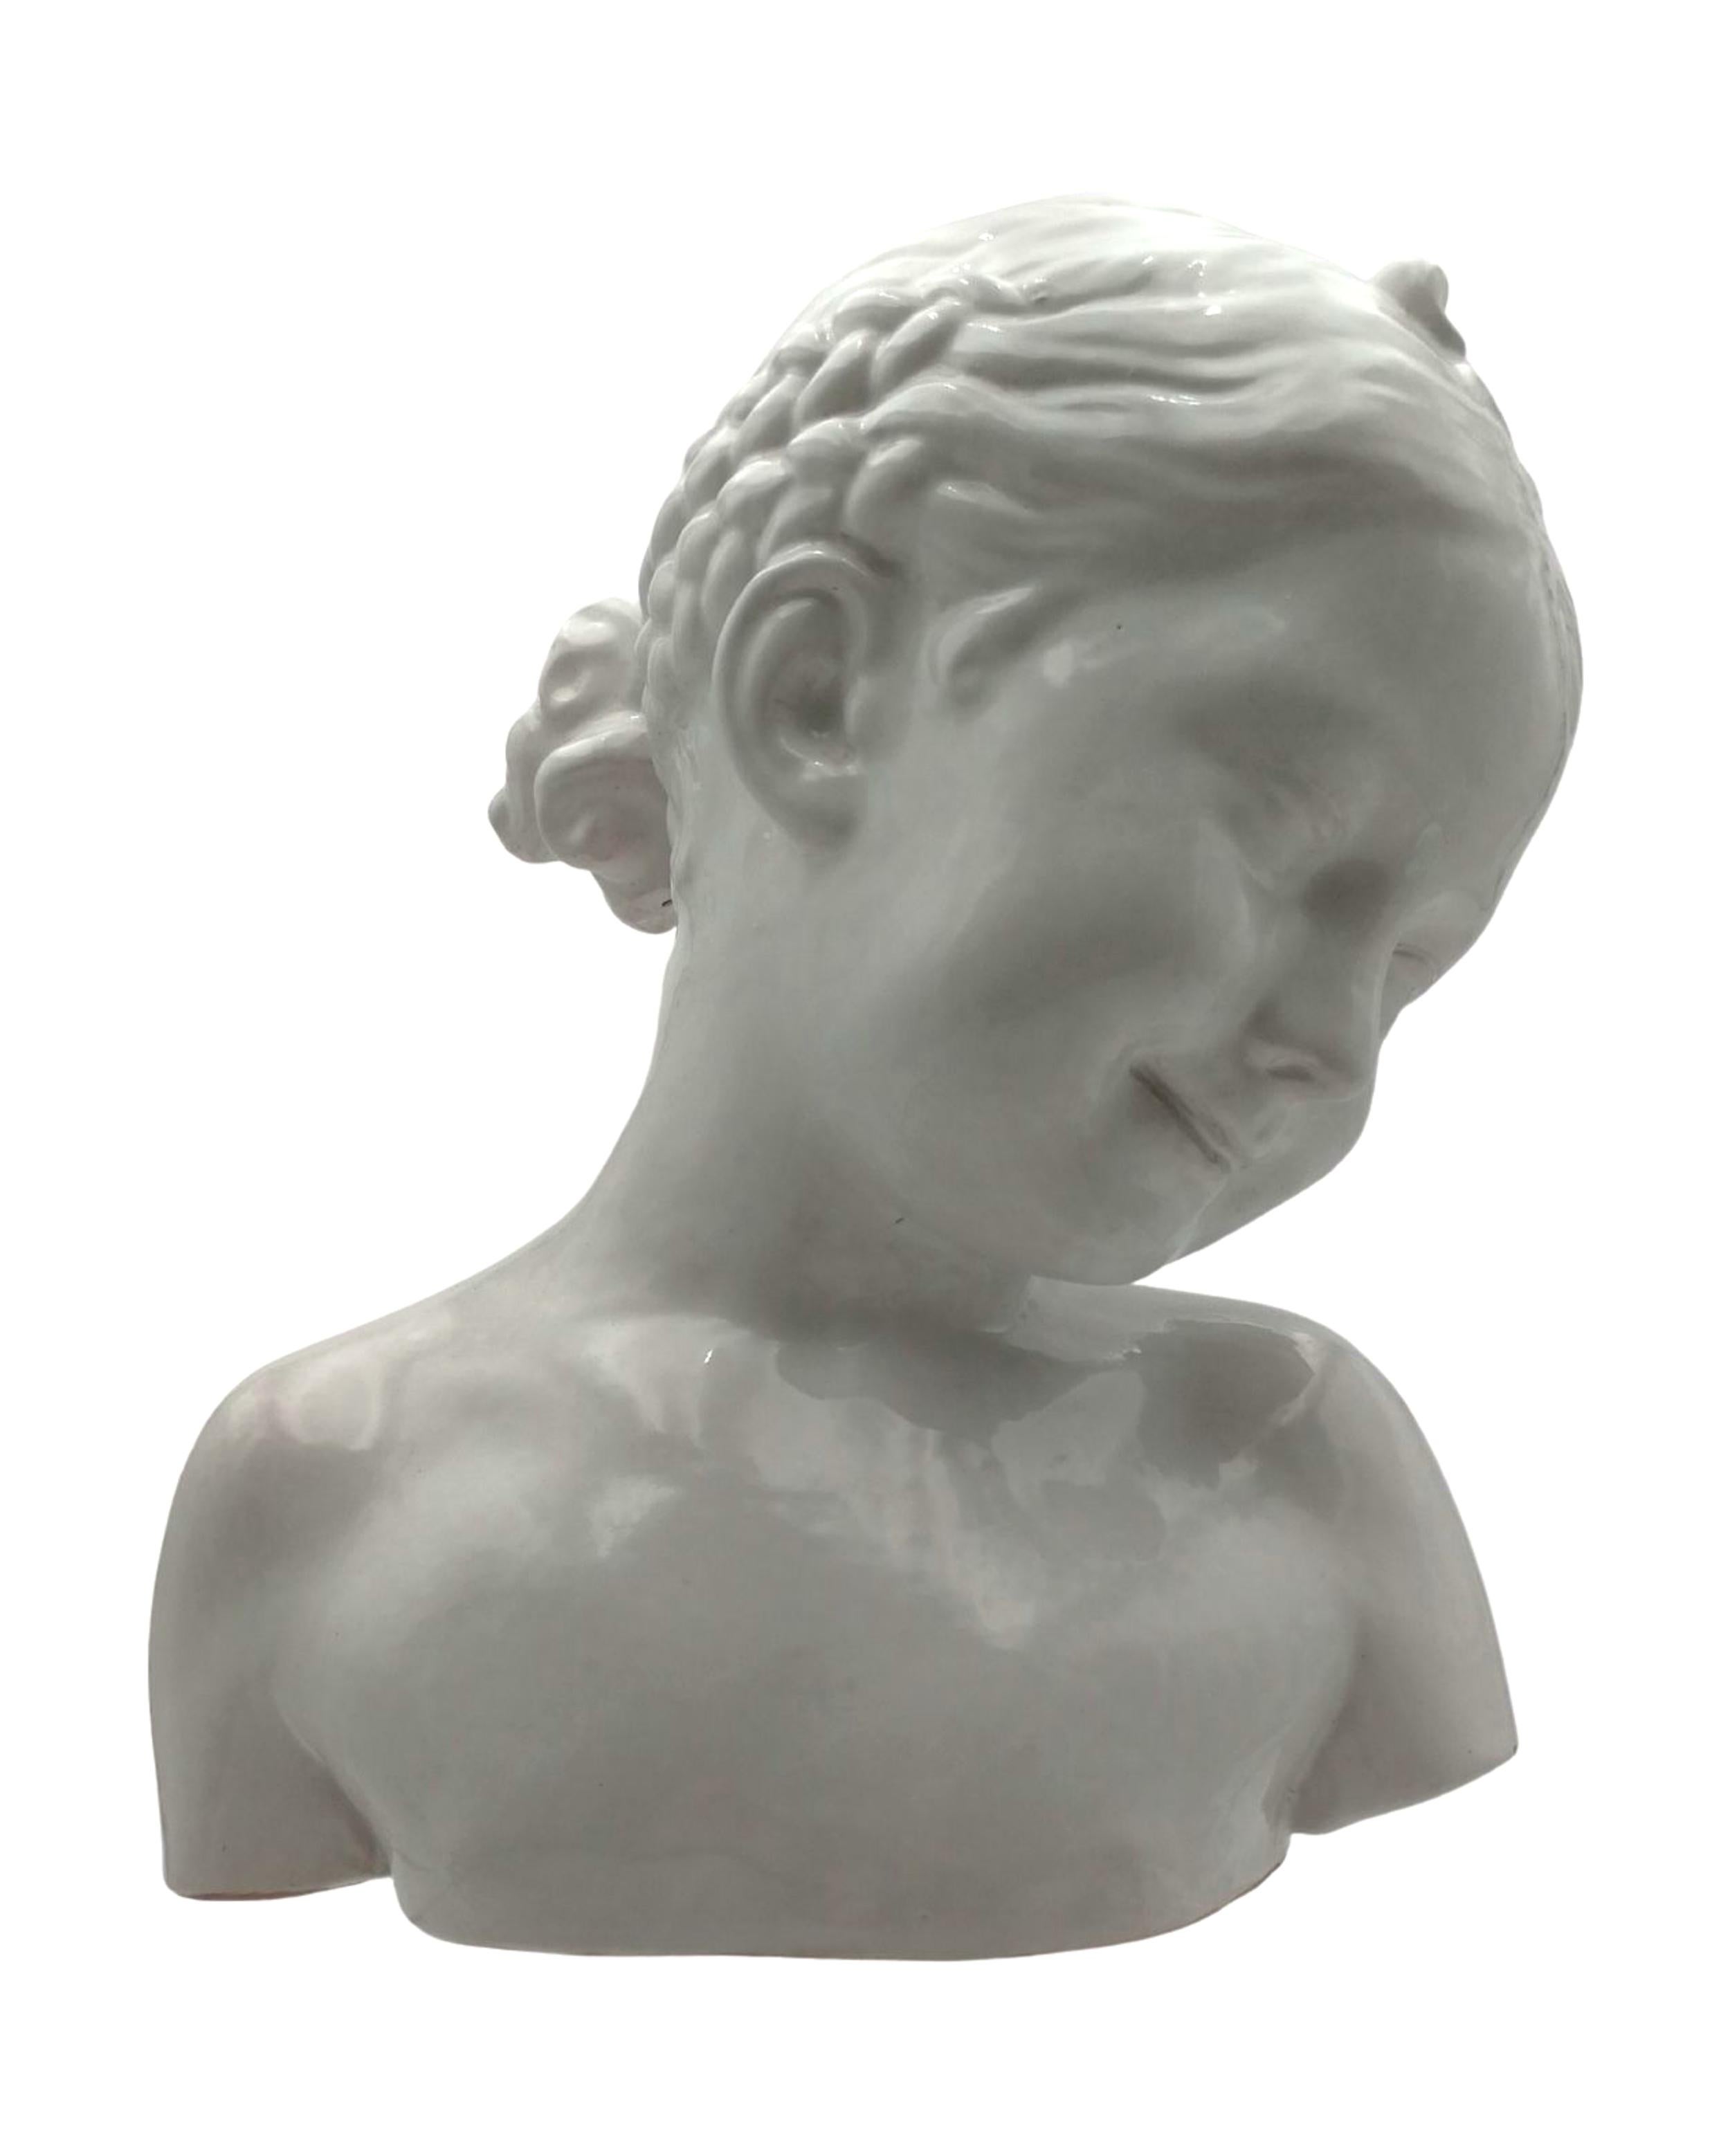 Lovely handmade glazed terracotta bust of a little girl. The amazingly sweet smile of this infant gril will catch your eye and bring peaceful sweetness to any room in a house.
The bust was acquired in Spain in the 60’s, it is not signed and the